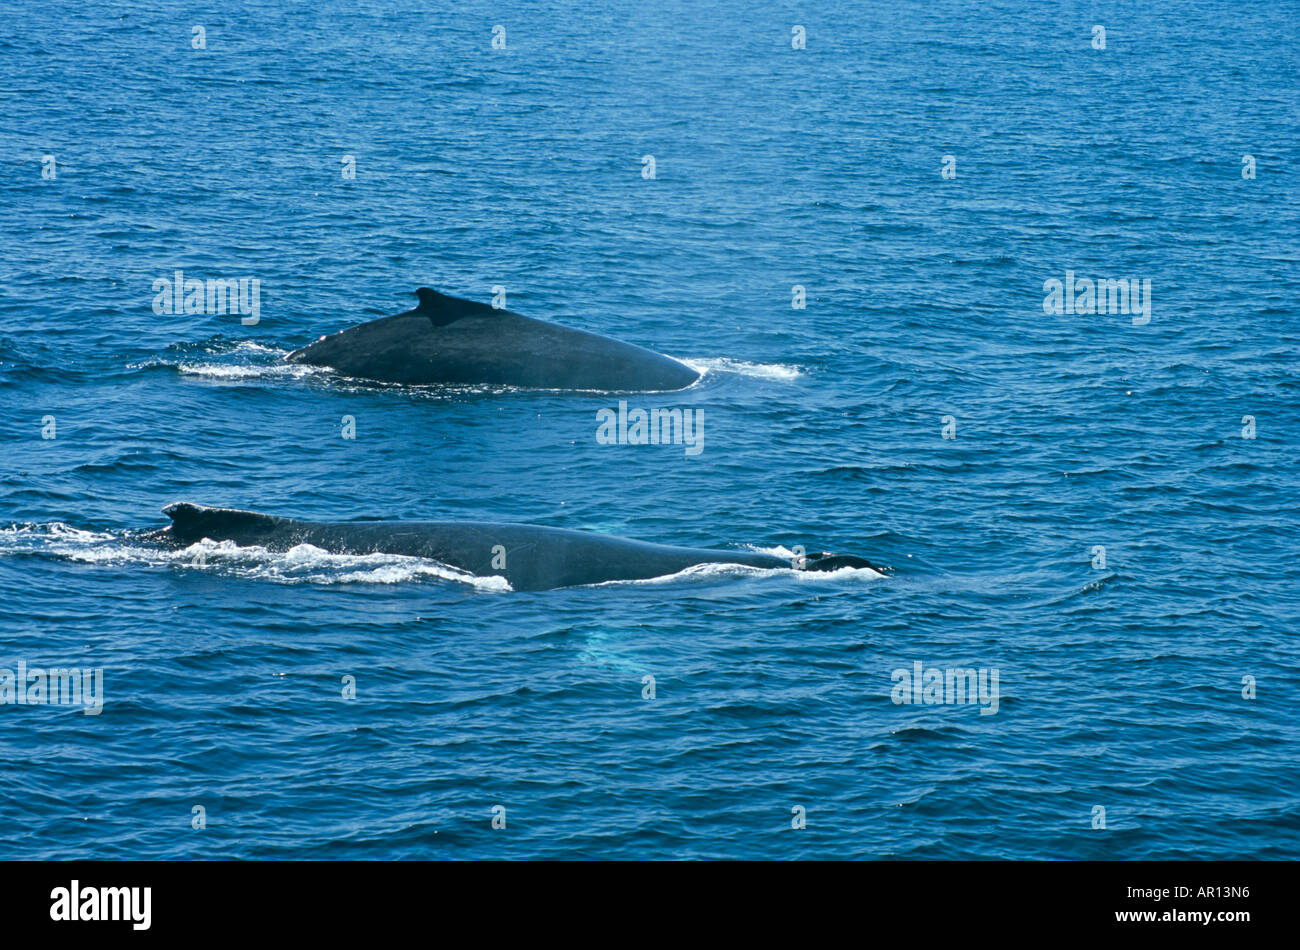 Two Humpback Whales Swimming Off The Eastern Coast Of Australia